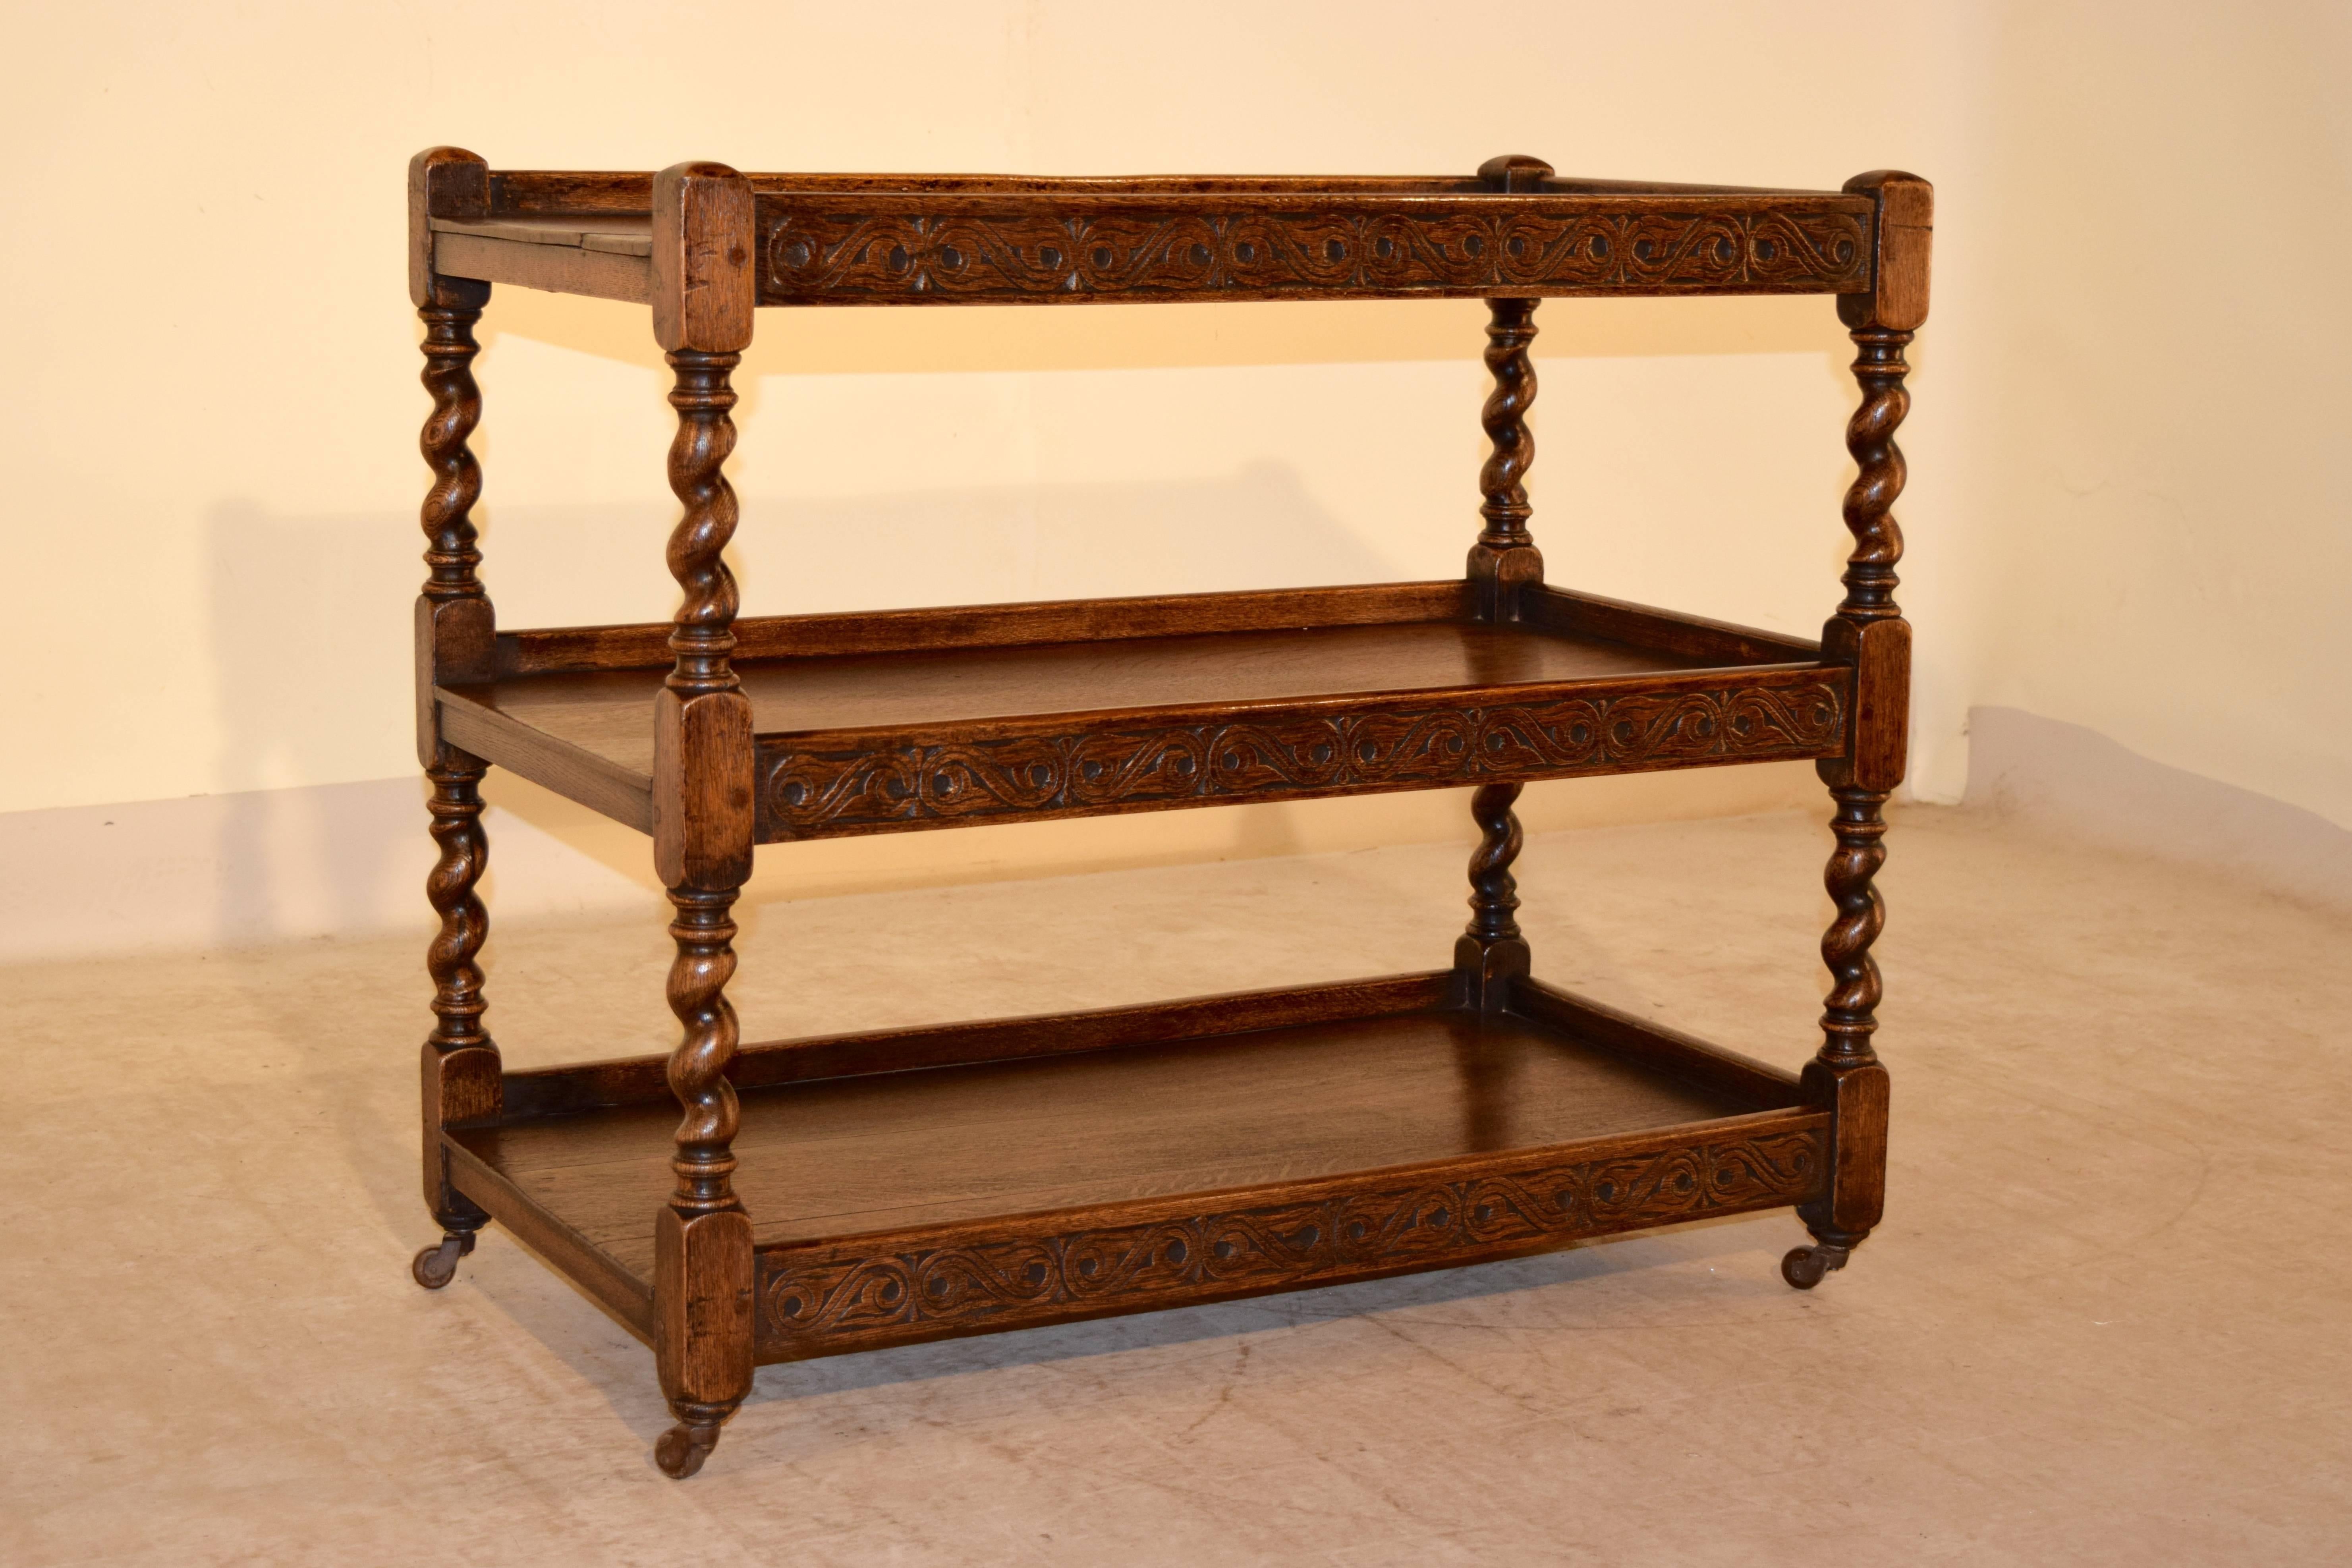 19th century English oak drinks cart in an unusually large size. The piece has three shelves separated by hand turned barley twist shelf supports and ending in original casters. The galleries have hand-carved designs as well.